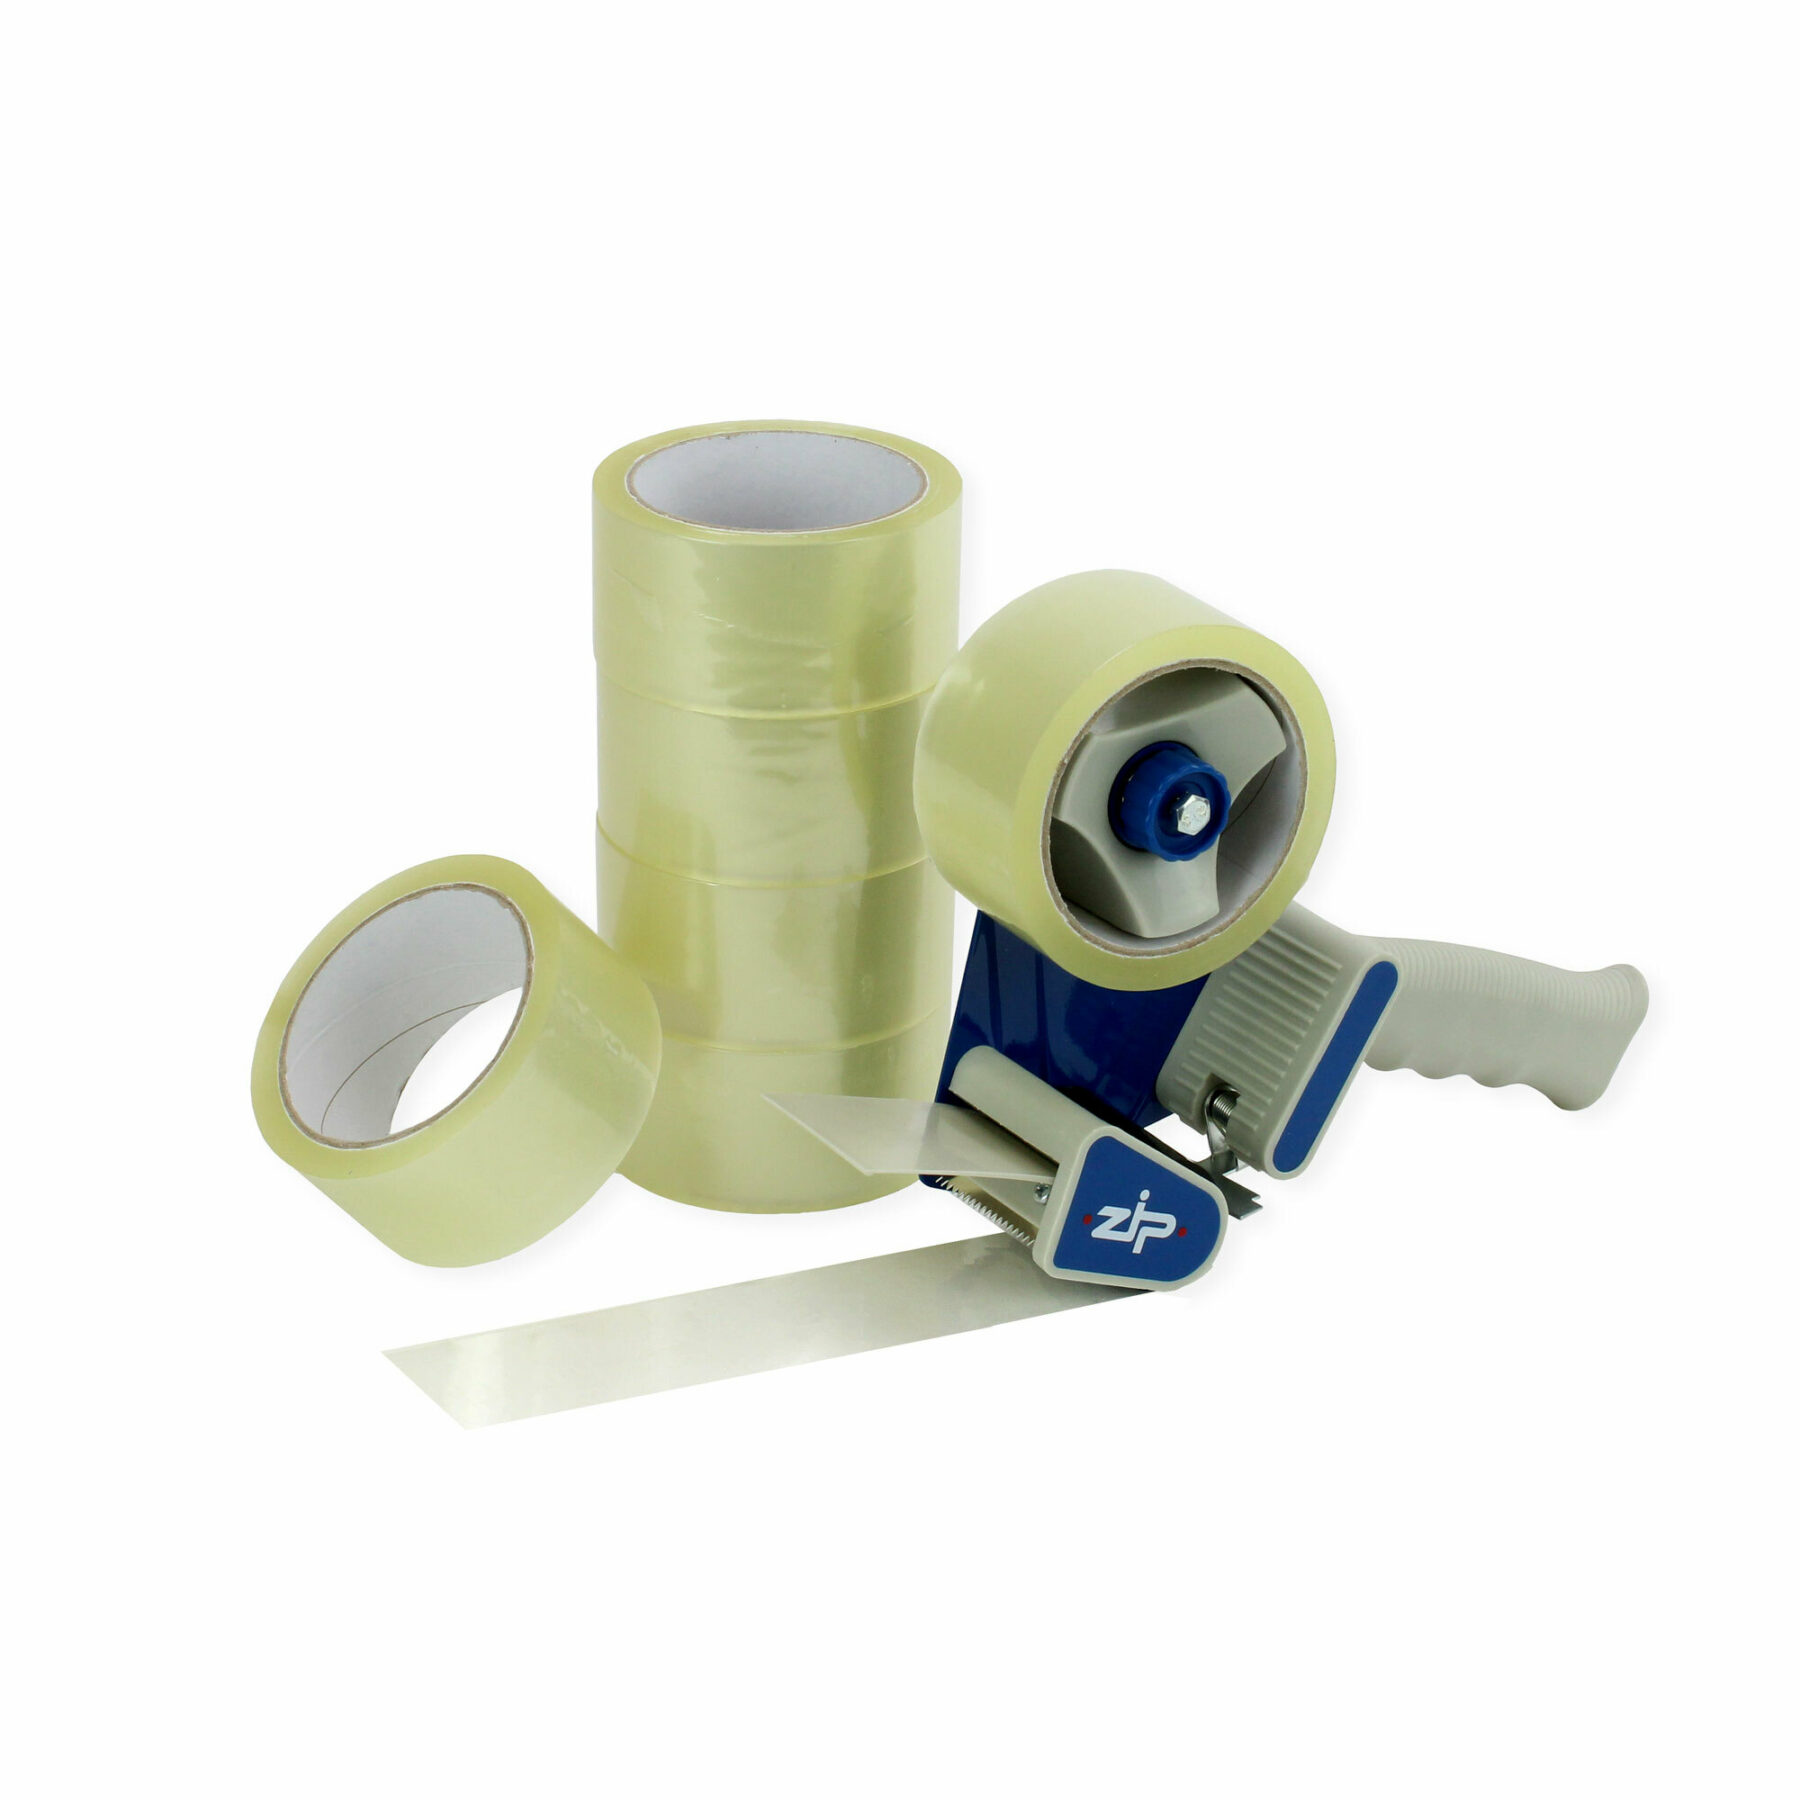 KT251 Clear Tape (6pcs) with Tape Gun